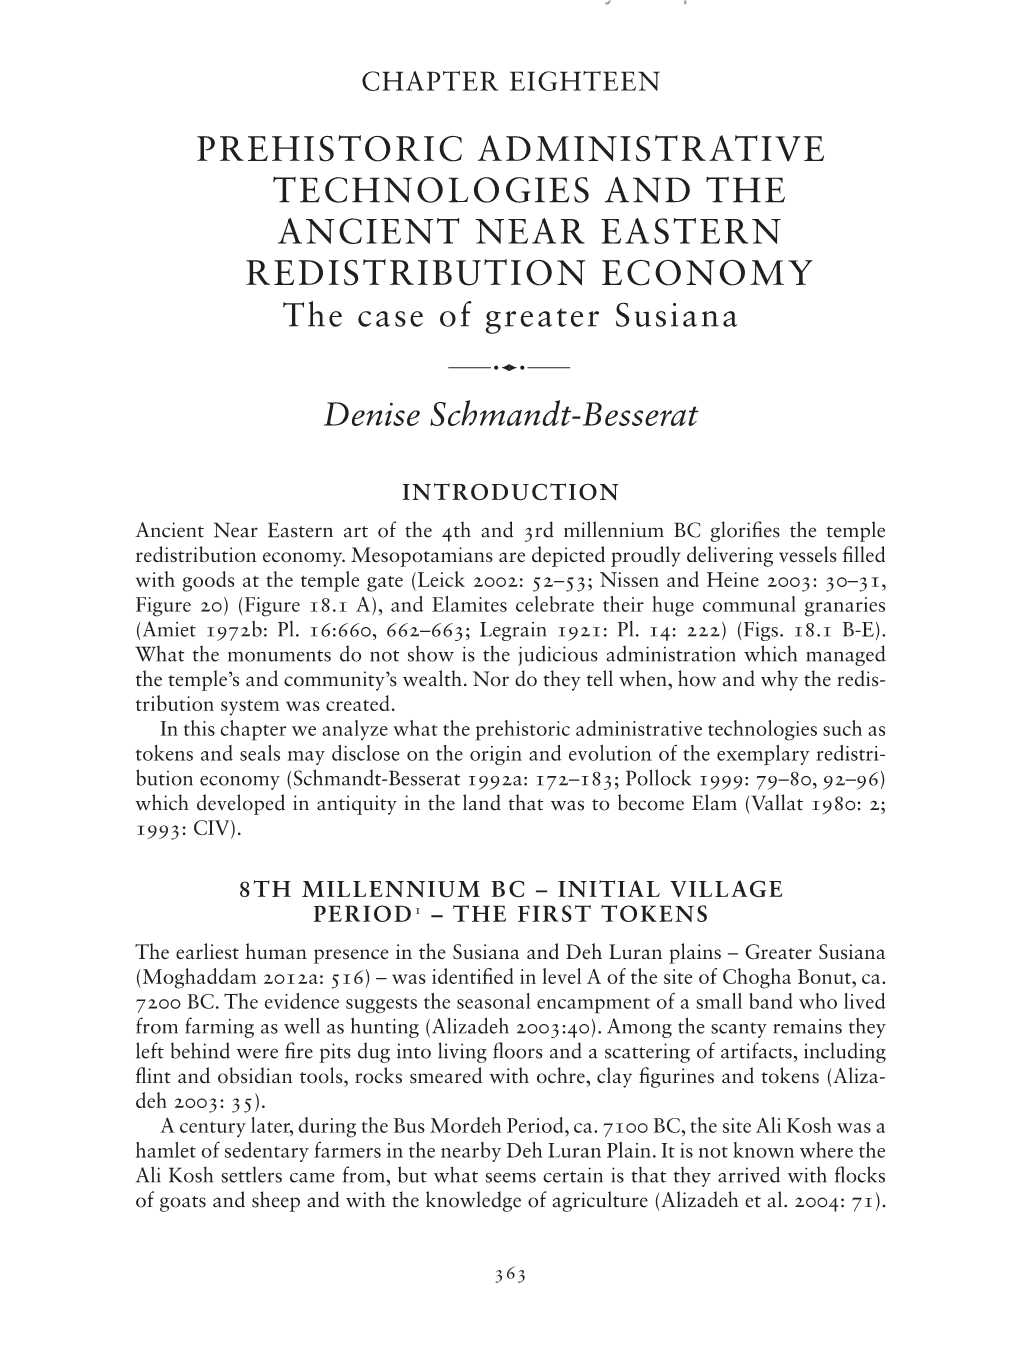 PREHISTORIC ADMINISTRATIVE TECHNOLOGIES and the ANCIENT NEAR EASTERN REDISTRIBUTION ECONOMY the Case of Greater Susiana